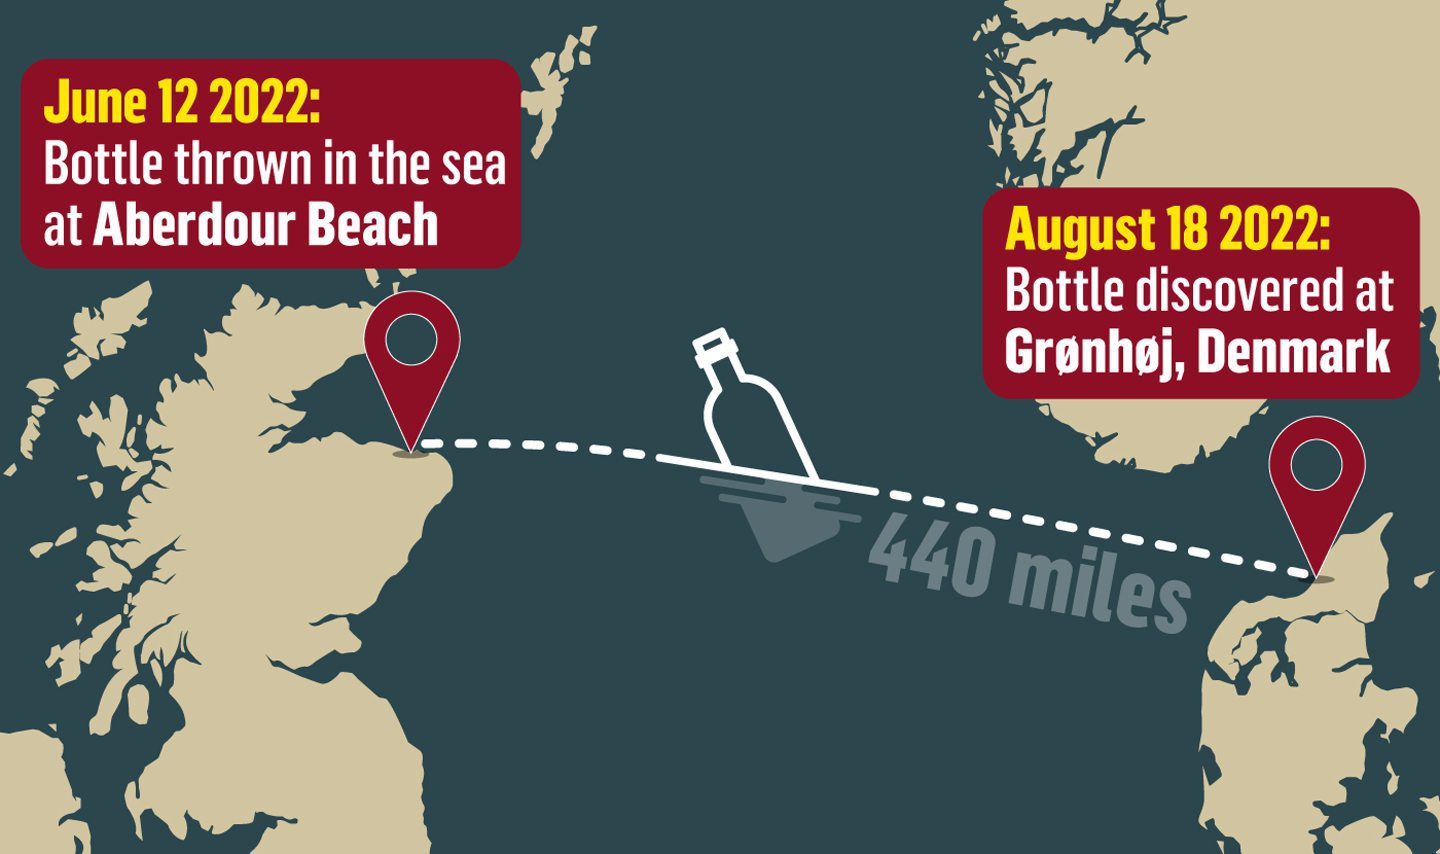 A graphic depicting the bottle's journey. It reads: June 12 2022, Bottle thrown in the sea at Aberdour Beach, Aberdeenshire. August 18 2022, Bottle discovered at Grønhøj Denmark. 